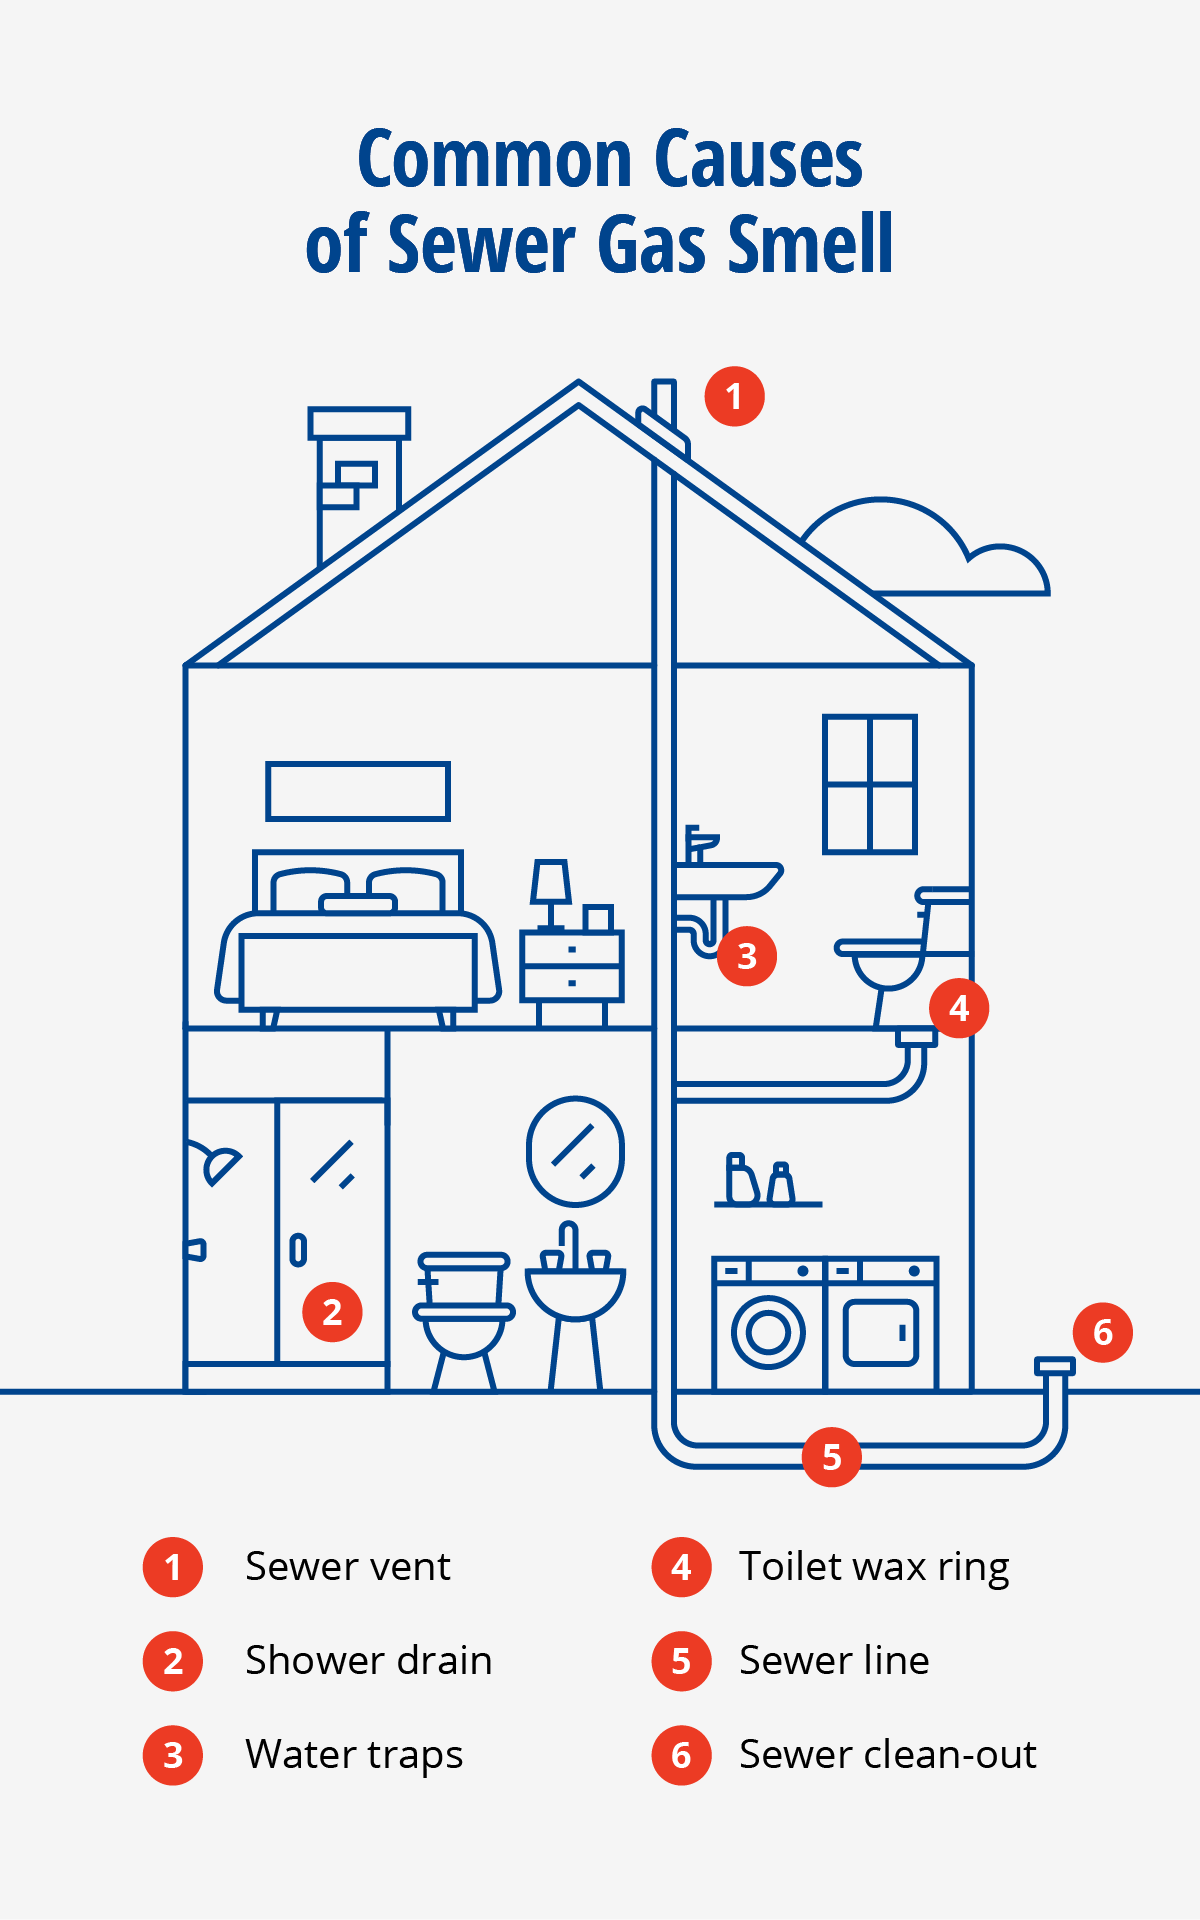  An illustration of a house showing six common causes of sewer gas smell. 